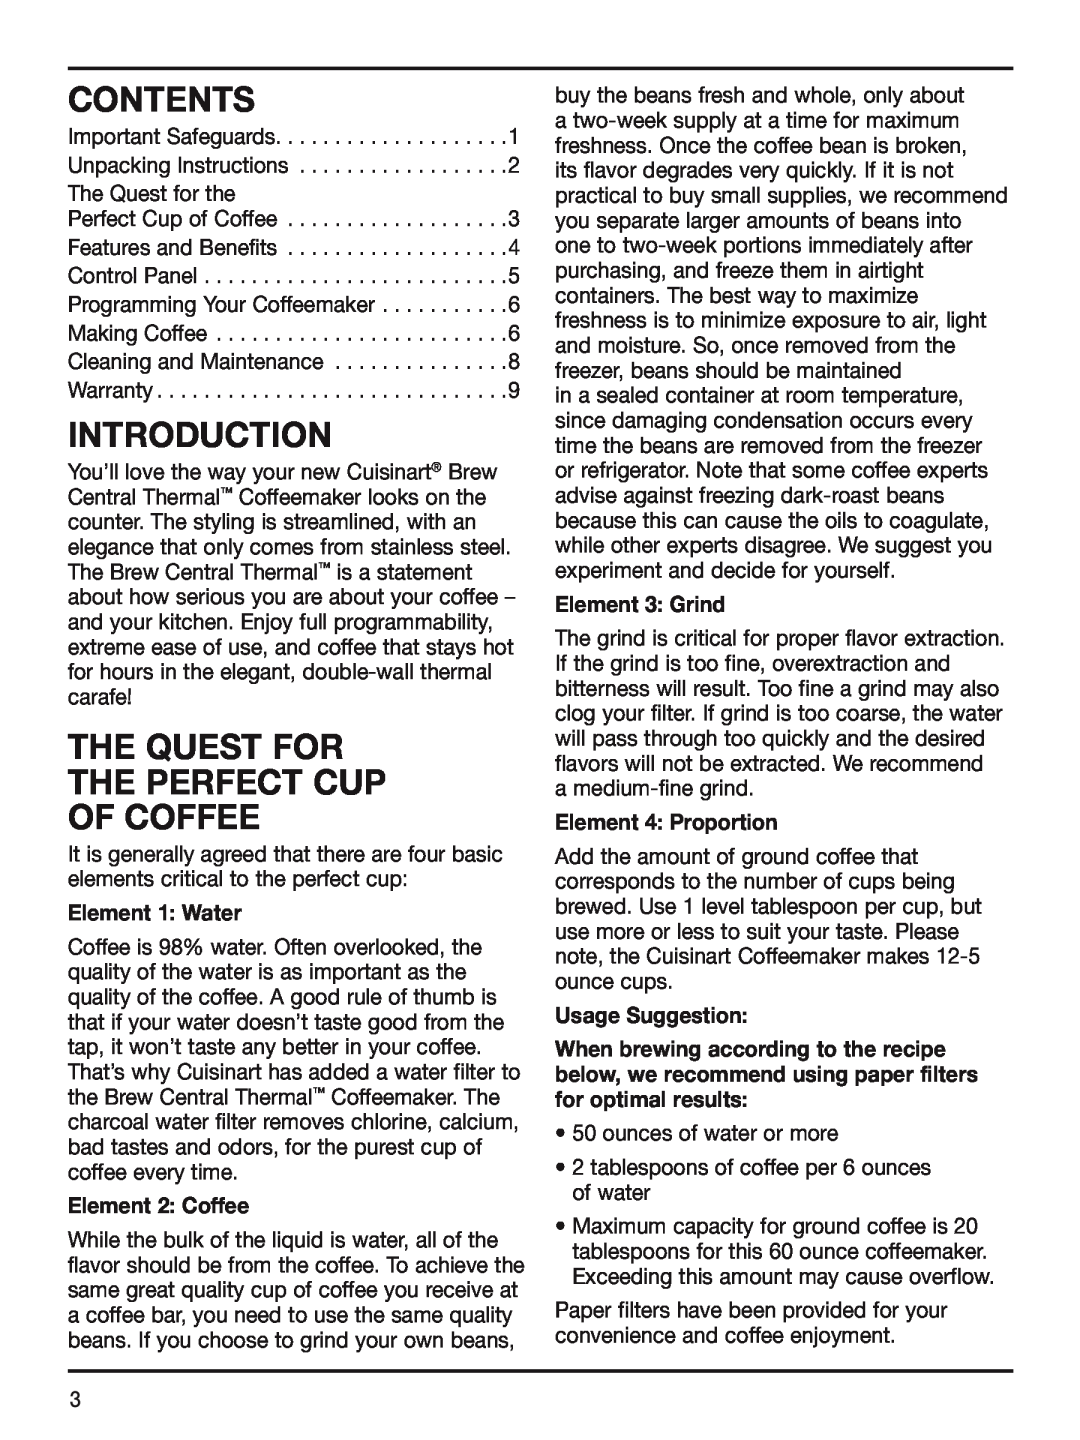 Cuisinart DCC-2400STR Contents, Introduction, The Quest for the Perfect Cup of Coffee, Element 1 Water, Element 2 Coffee 